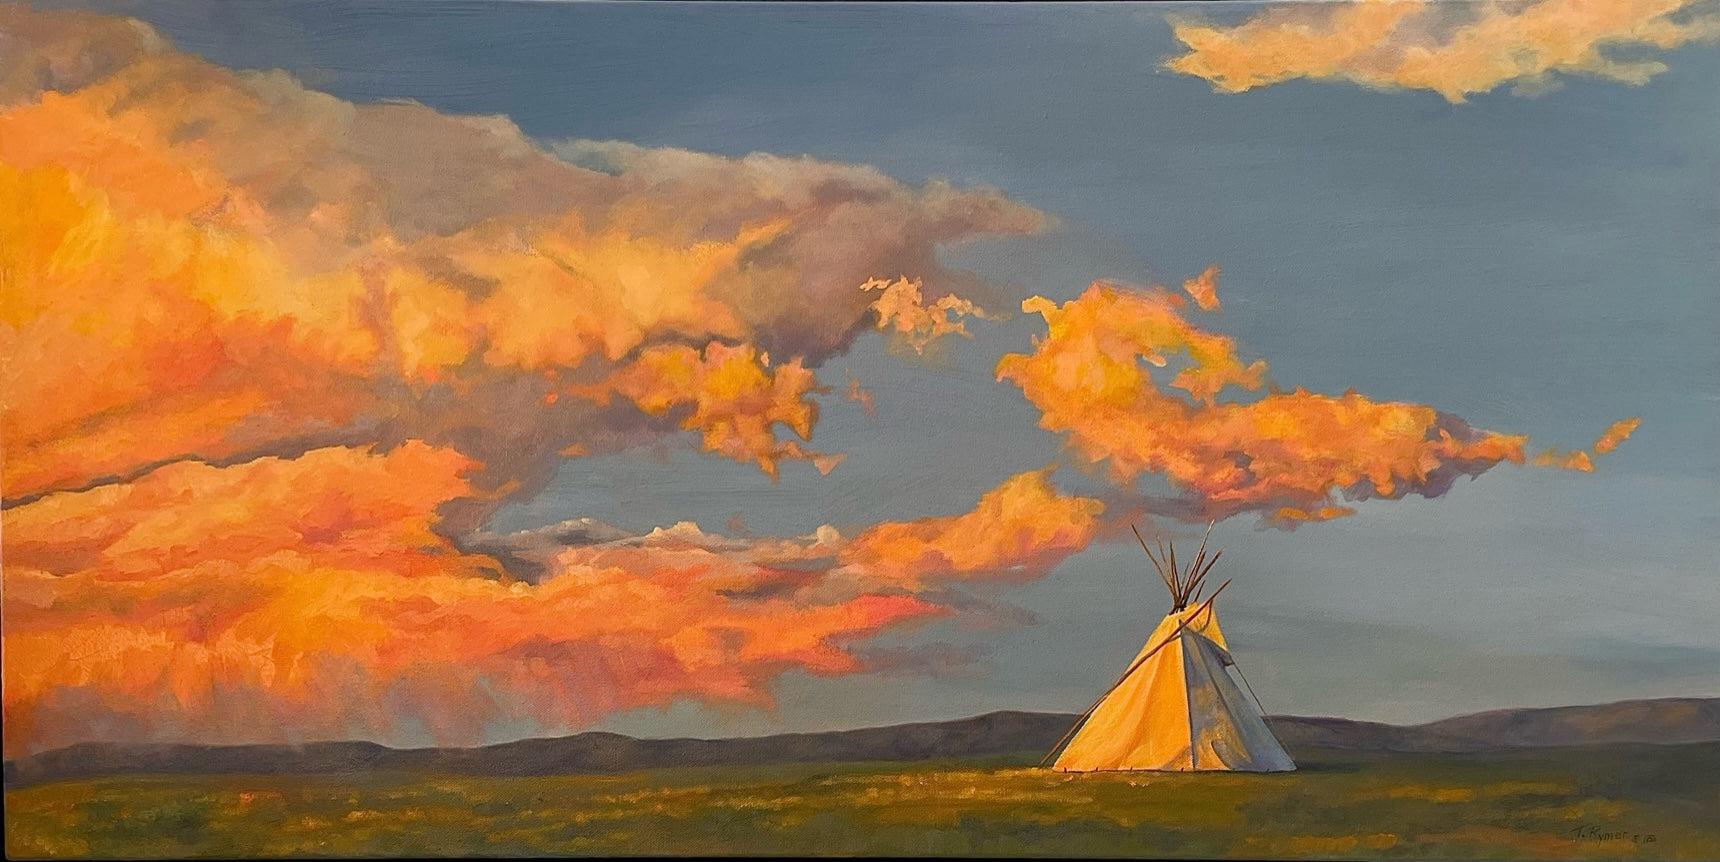 They Saw Falling Clouds-Painting-Tamara Rymer-Sorrel Sky Gallery